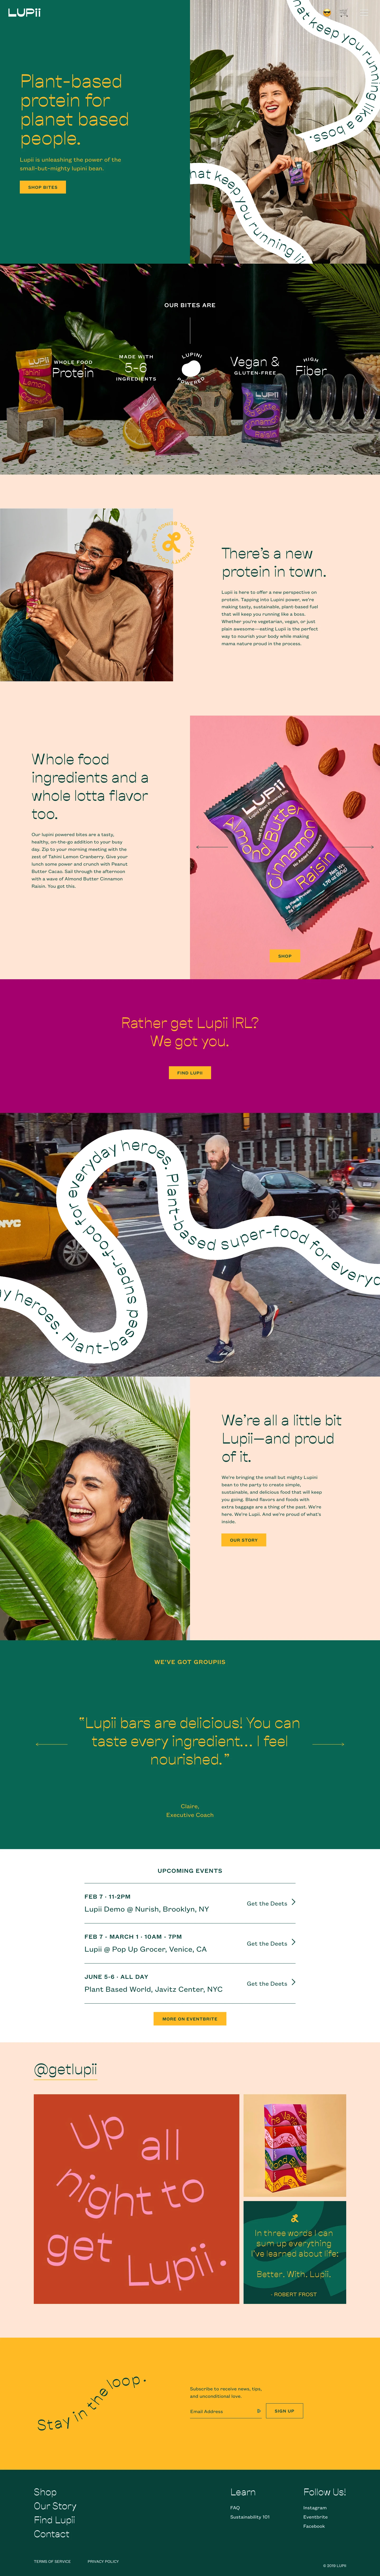 Lupii Landing Page Example: Plant-based protein for planet based people. Lupii is unleashing the power of the small‑but‑mighty lupini bean.